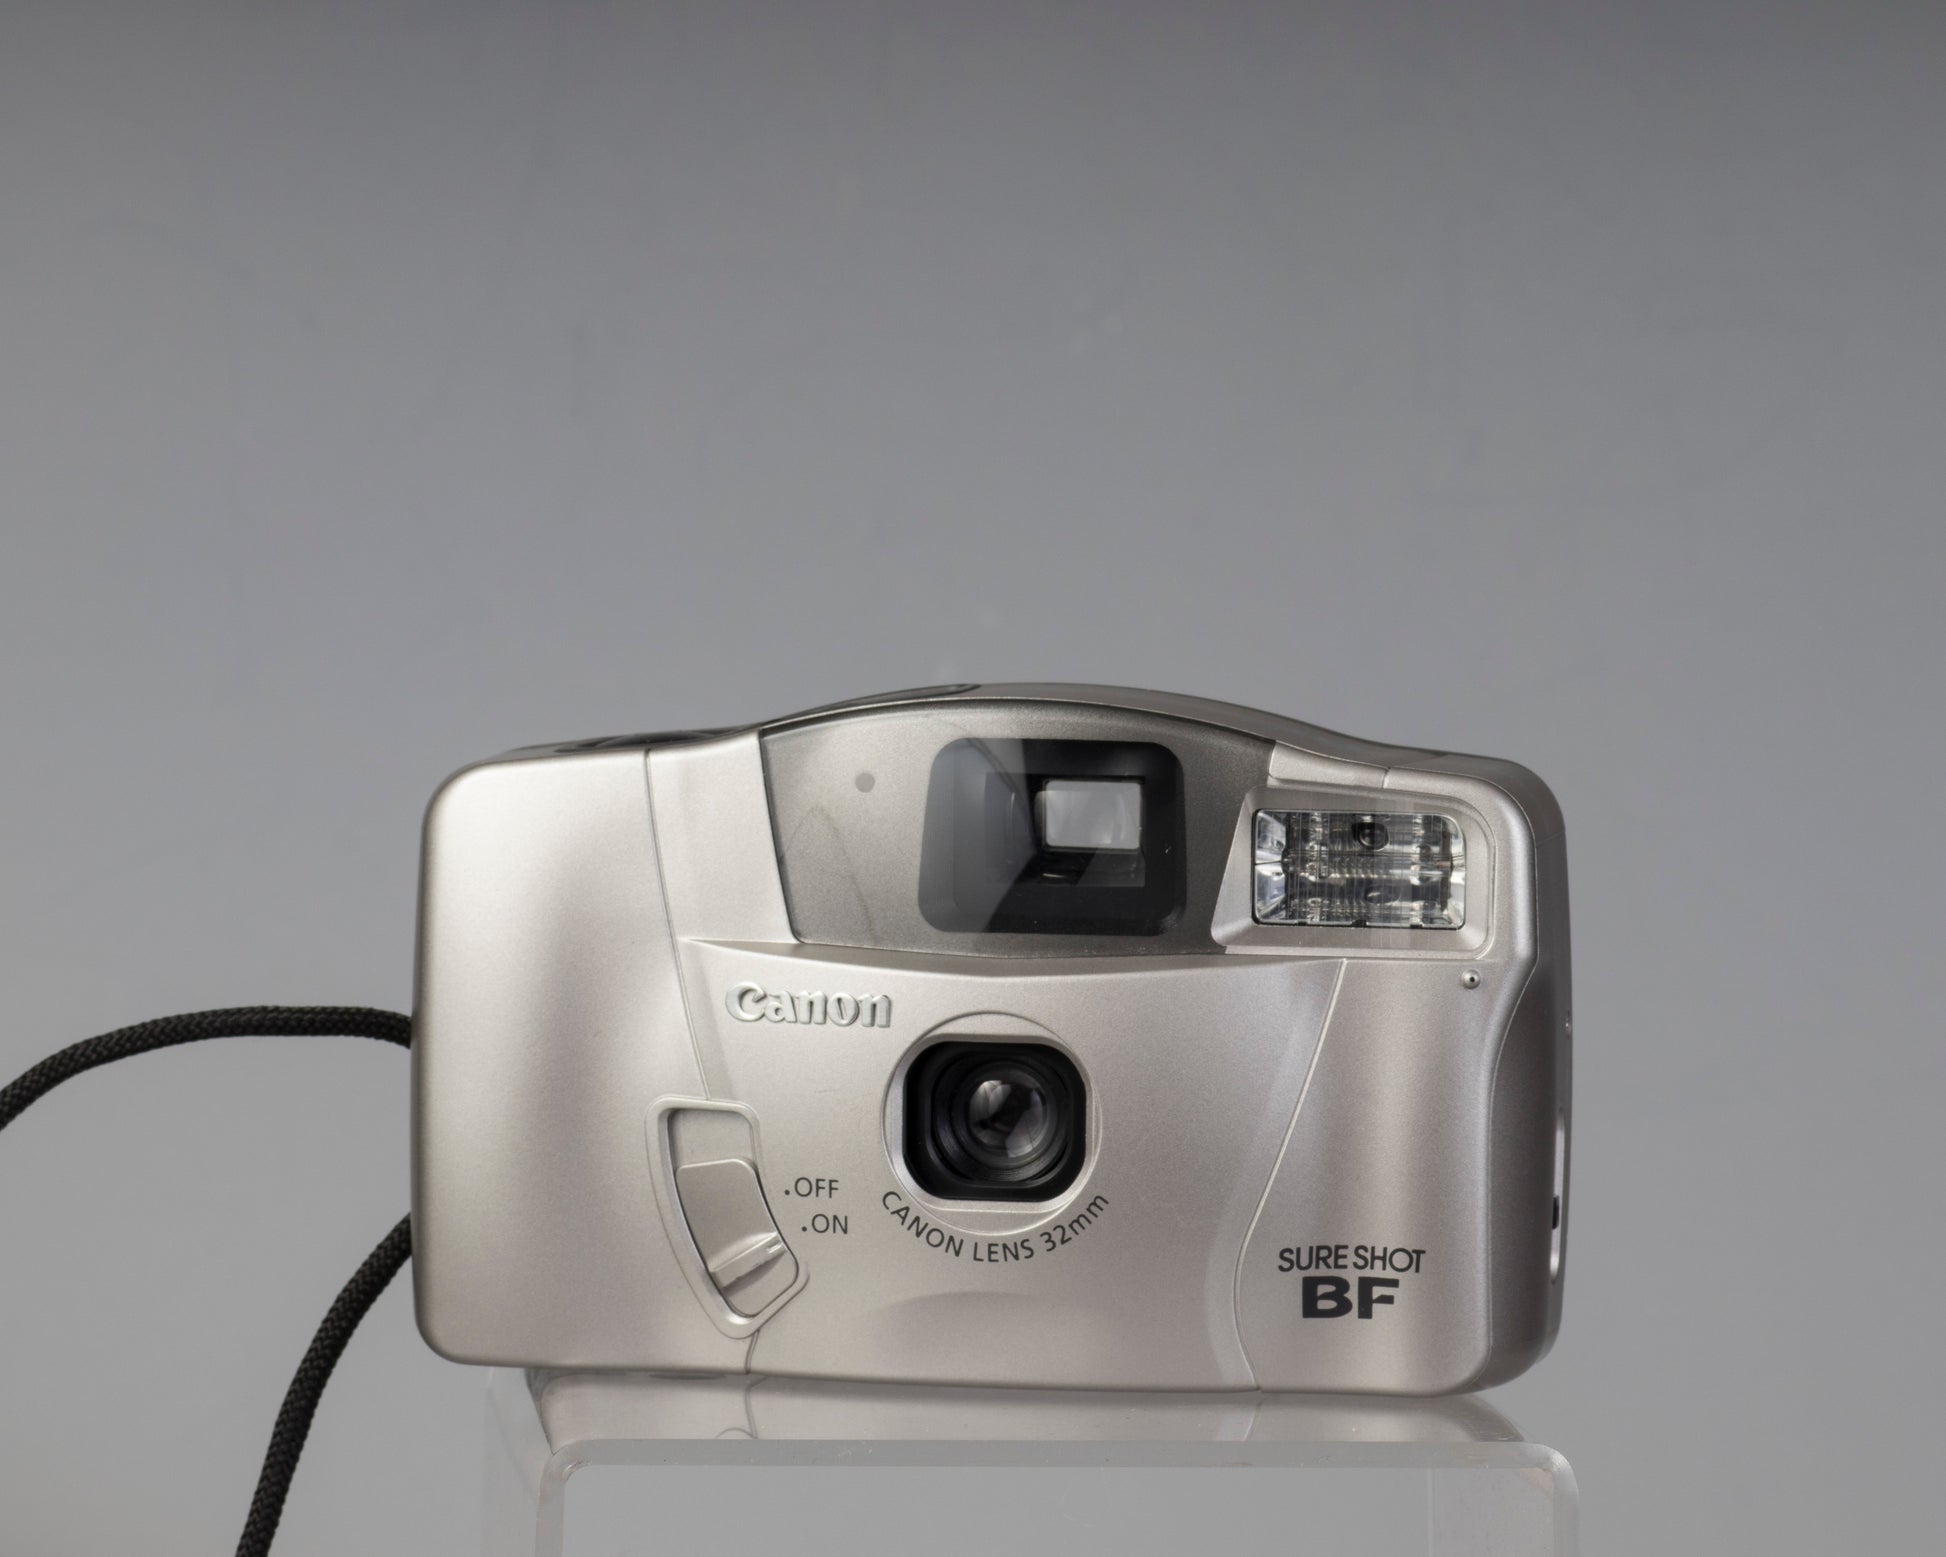 The Canon Sure Shot BF is a compact 35mm point-and-shoot with an unually large and bright viewfinder